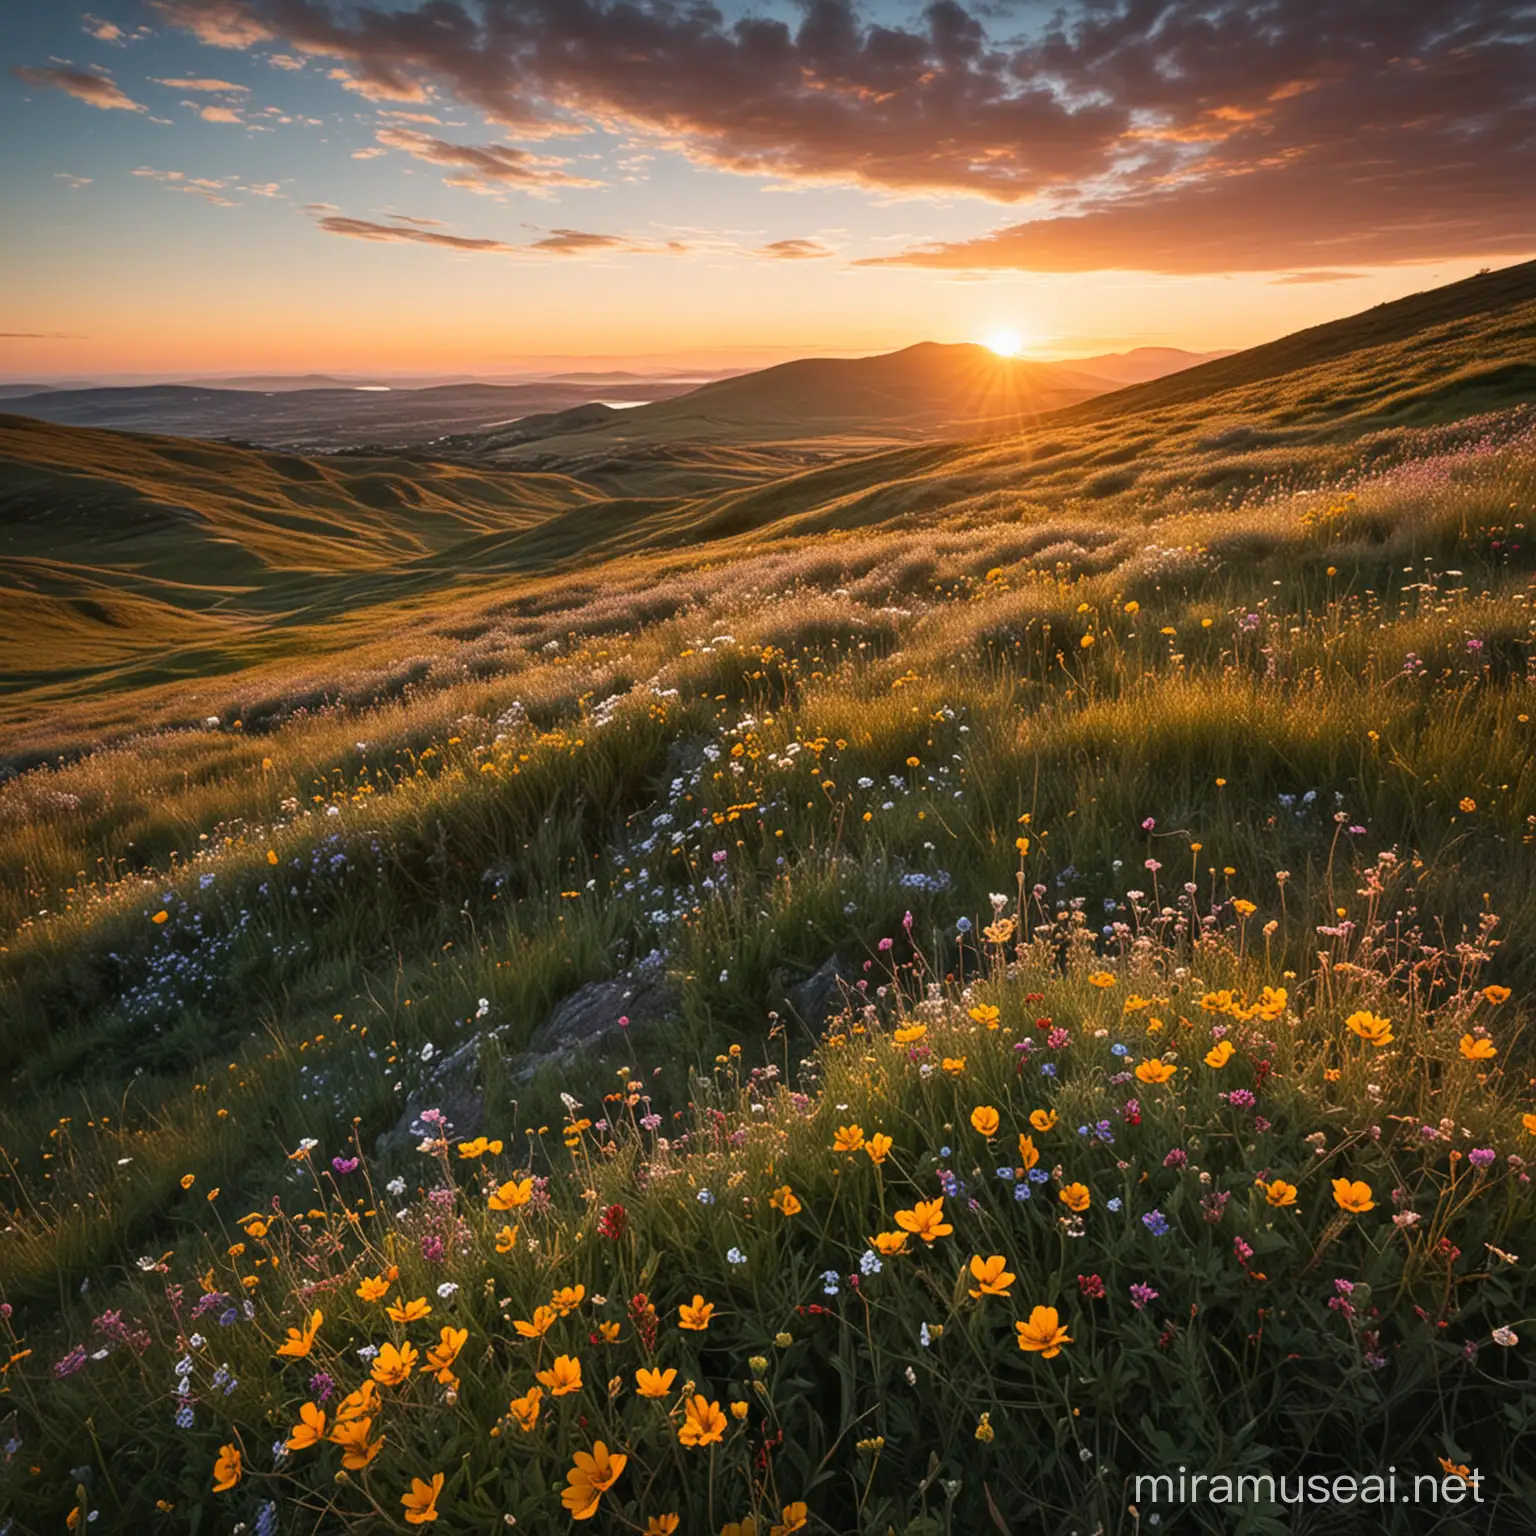 Wild flowers on hills blowing in the wind with a sunset in the distance